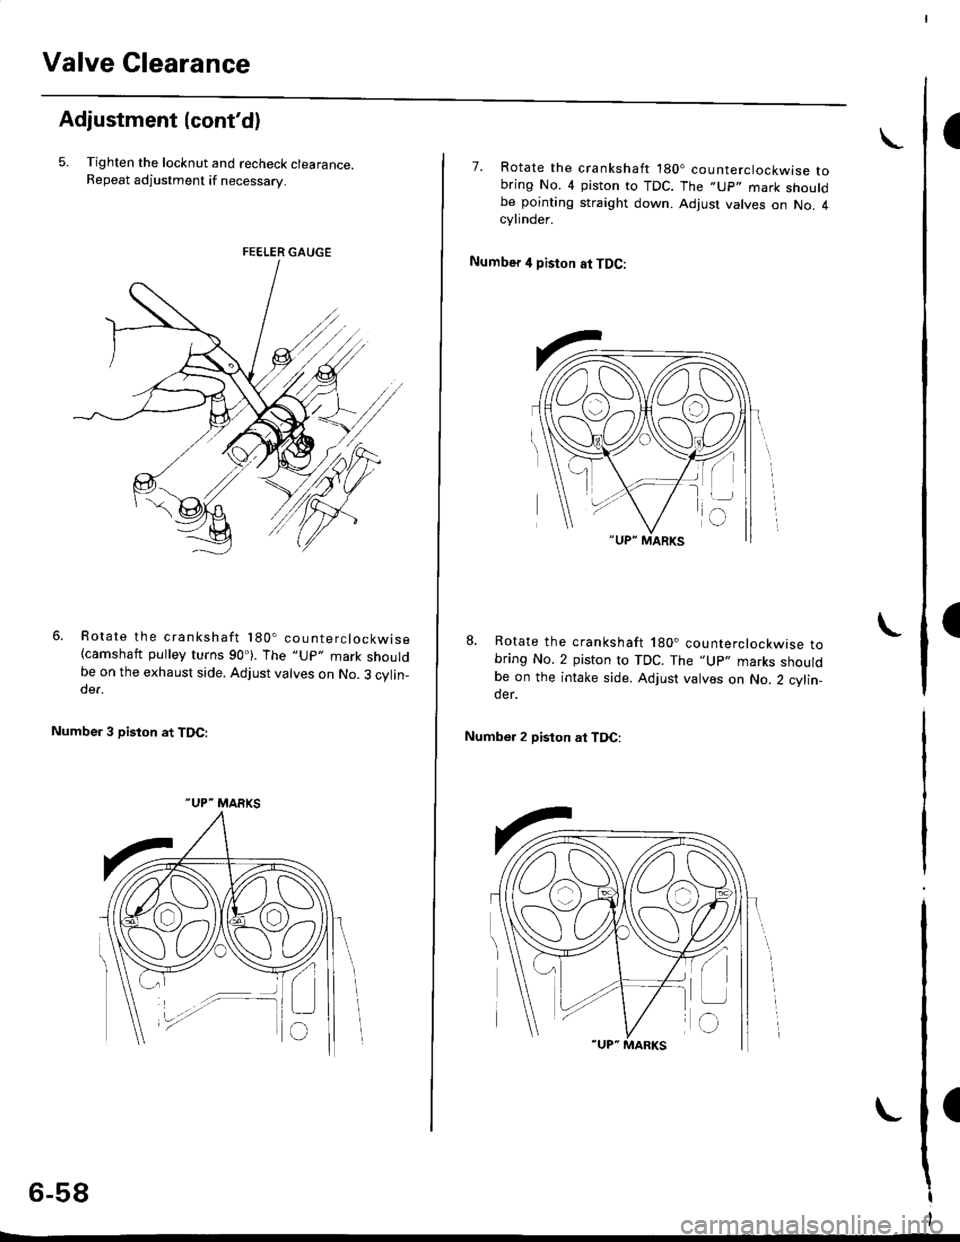 HONDA CIVIC 2000 6.G Owners Guide Valve Clearance
I
I
I
Adjustment {contd)
5. Tighten the locknut and recheck clearance.Repeat adjustment if necessary.
Rotate the crankshaft 180. counterclockwise(camshaft pulley turns 90). The "Up" 